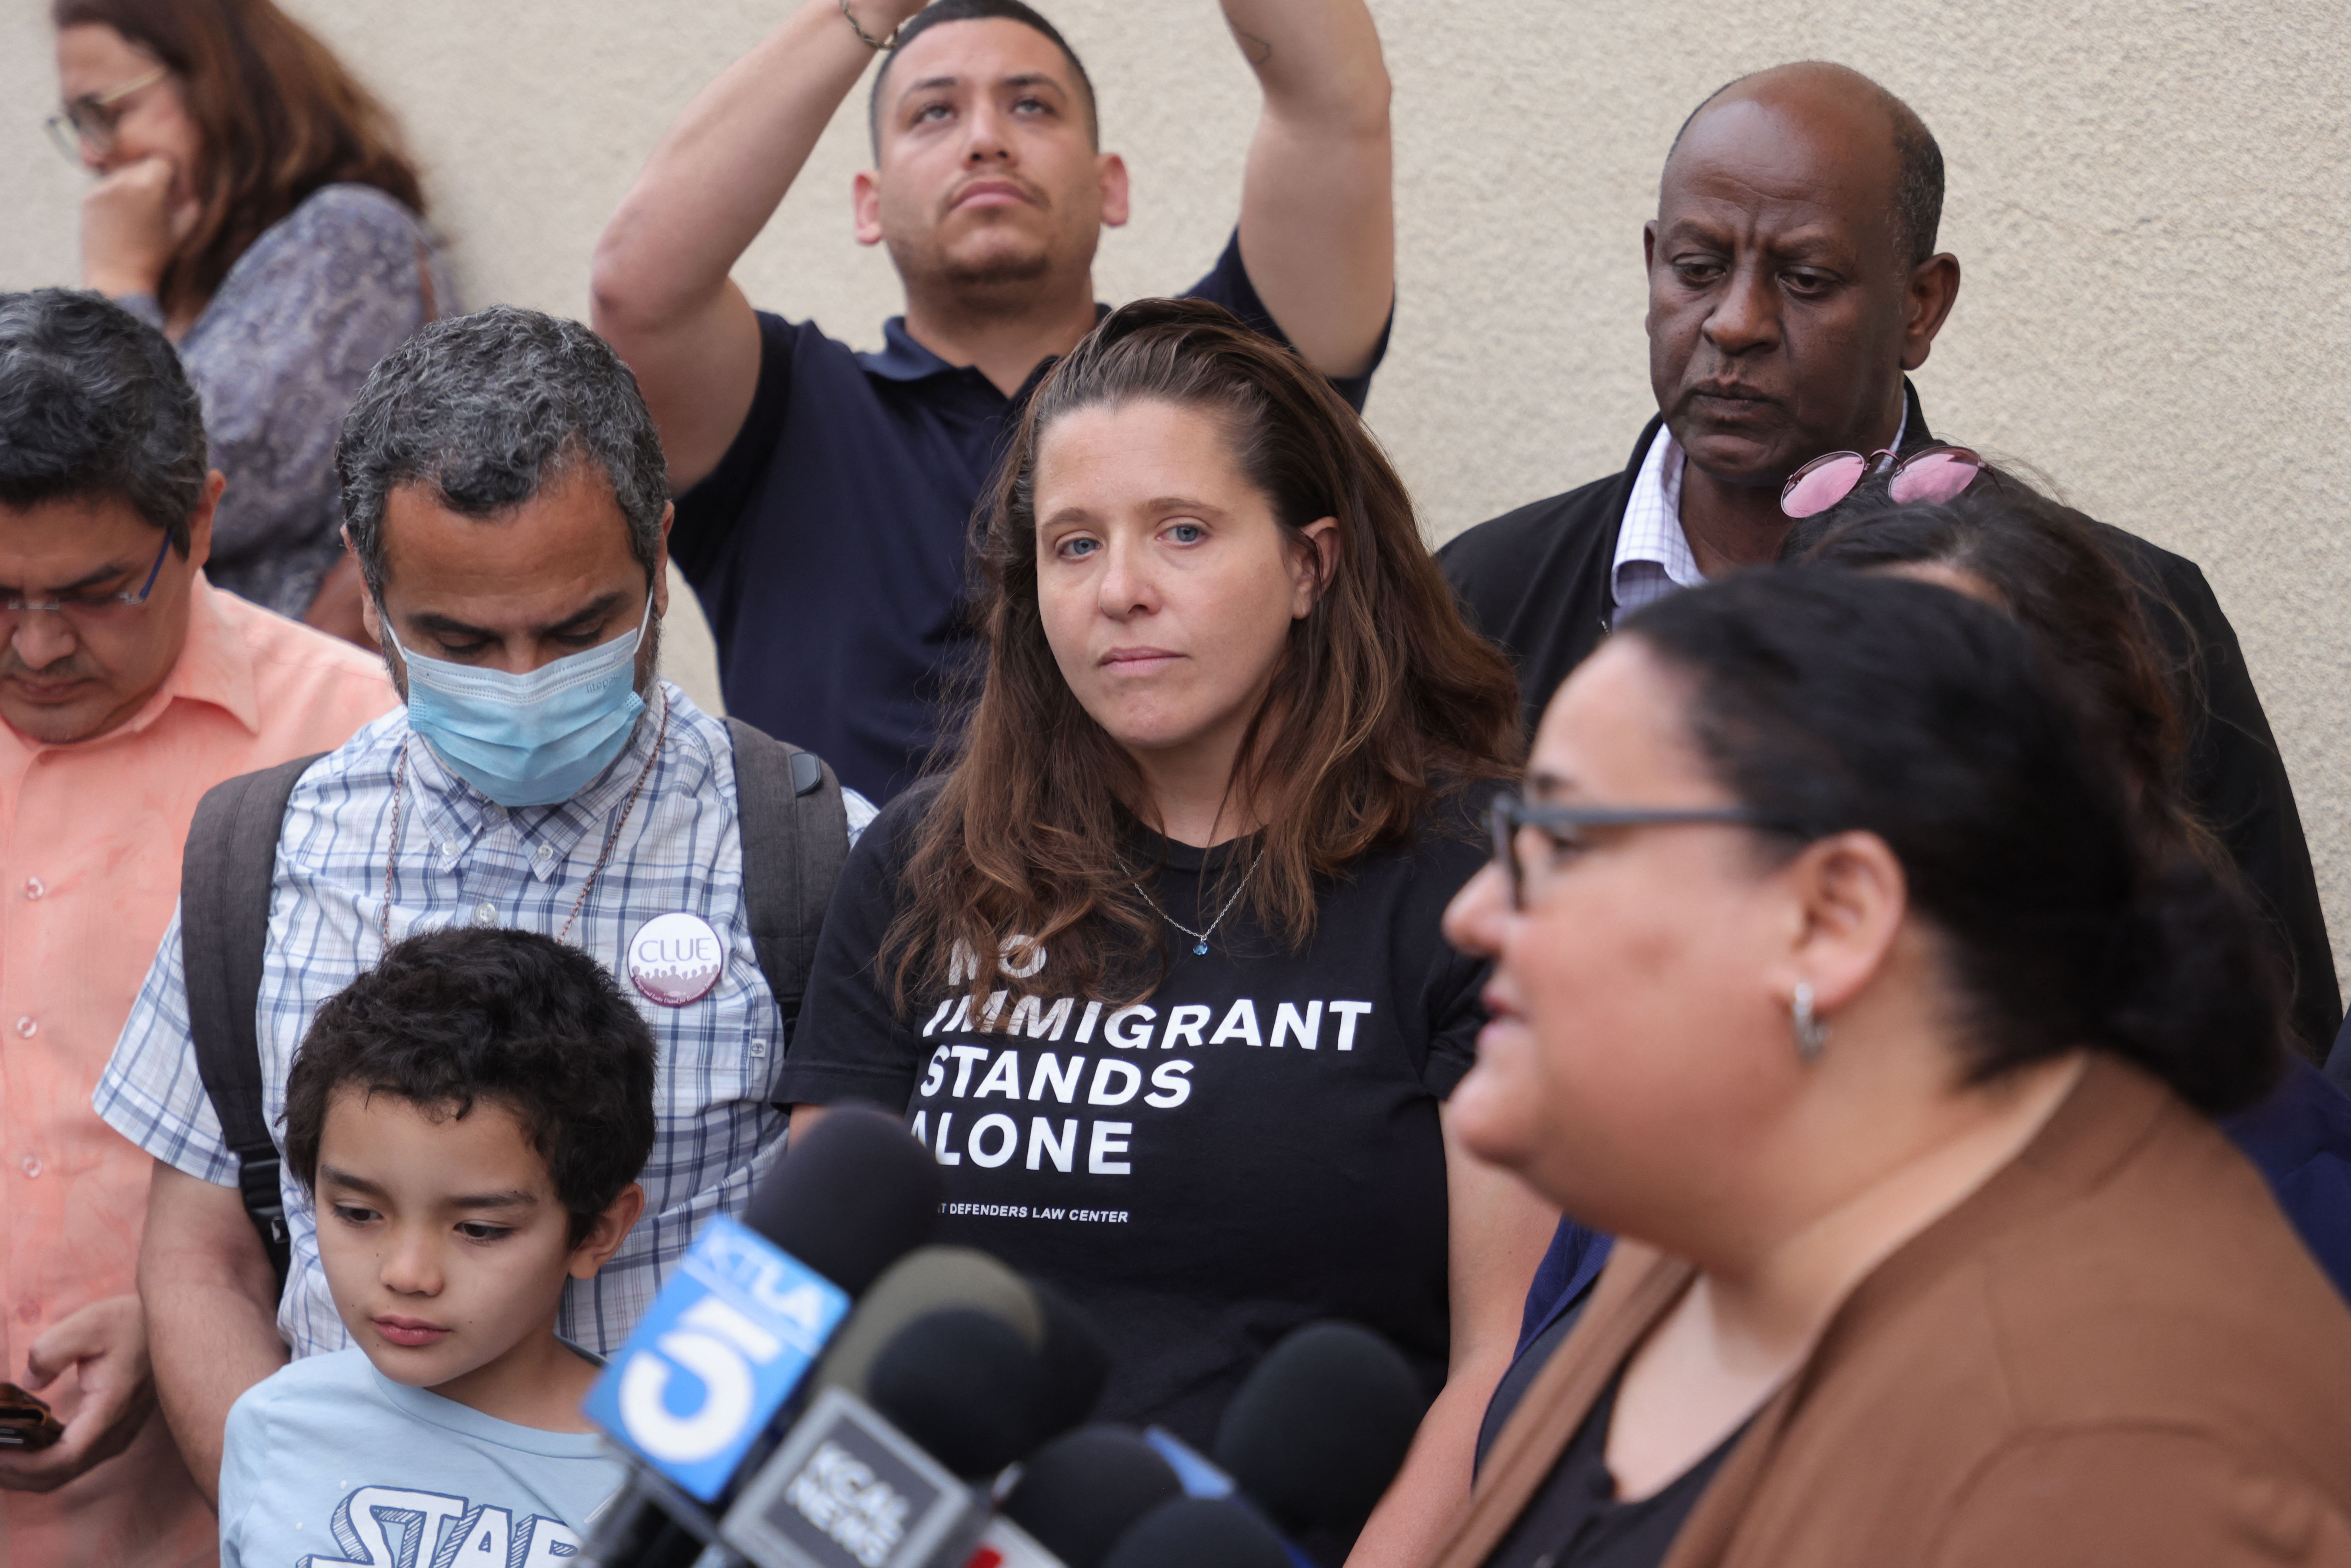 Lindsay Toczylowski (C), executive director of Immigrant Defenders Law Center, listens to a speaker outside St. Anthony Croatian Catholic Church where migrants have been transported in Los Angeles, June 14, 2023. A busload of 42 migrants including 8 children, had arrived at Union Station in Los Angeles from Texas as claimed by Governor Greg Abbott Wednesday, June 14, 2023. (Photo by DAVID SWANSON / AFP) (Photo by DAVID SWANSON/AFP via Getty Images)